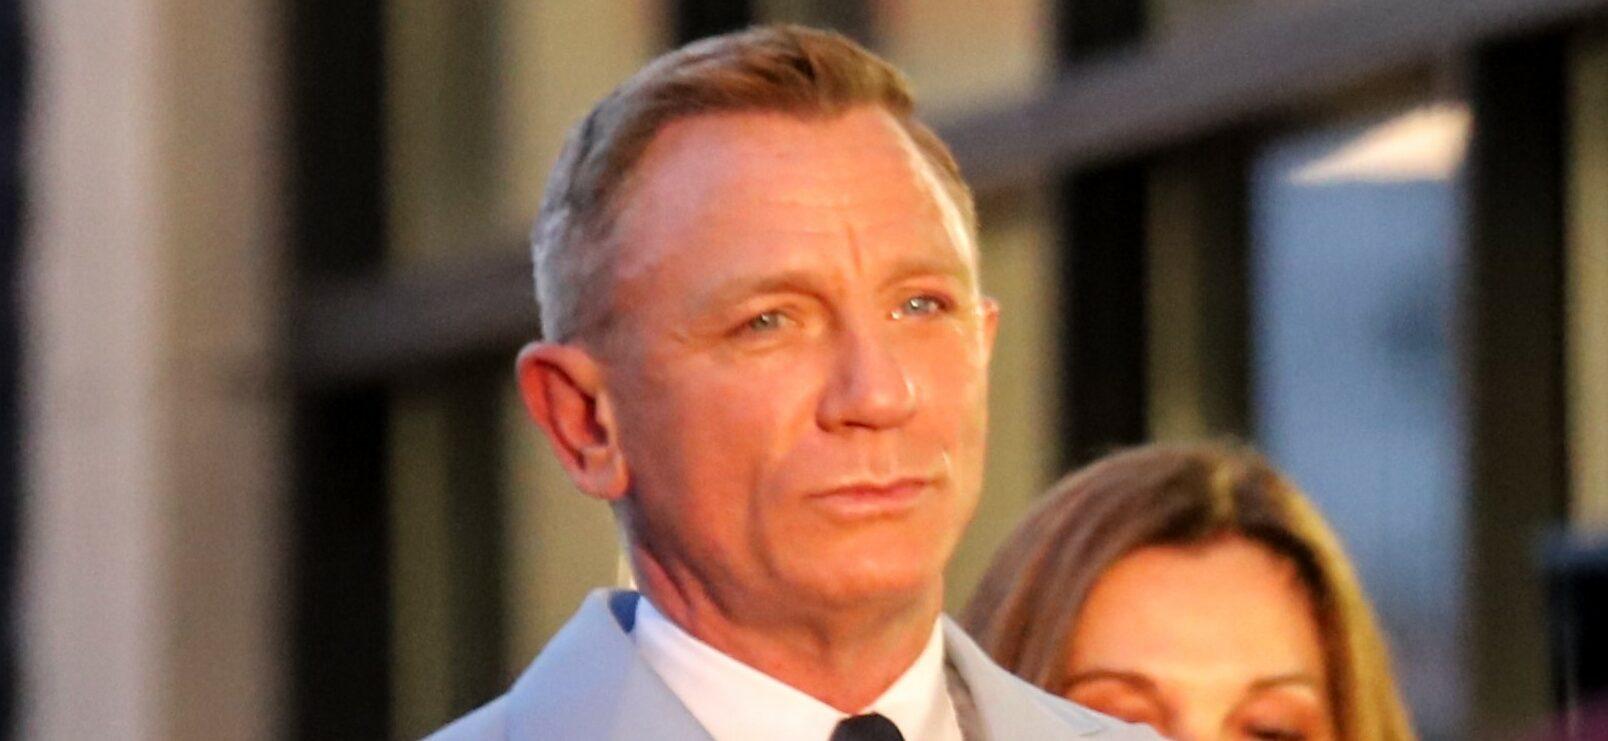 Daniel Craig Thought Of Quitting His Role As ‘James Bond’ After ‘Spectre’